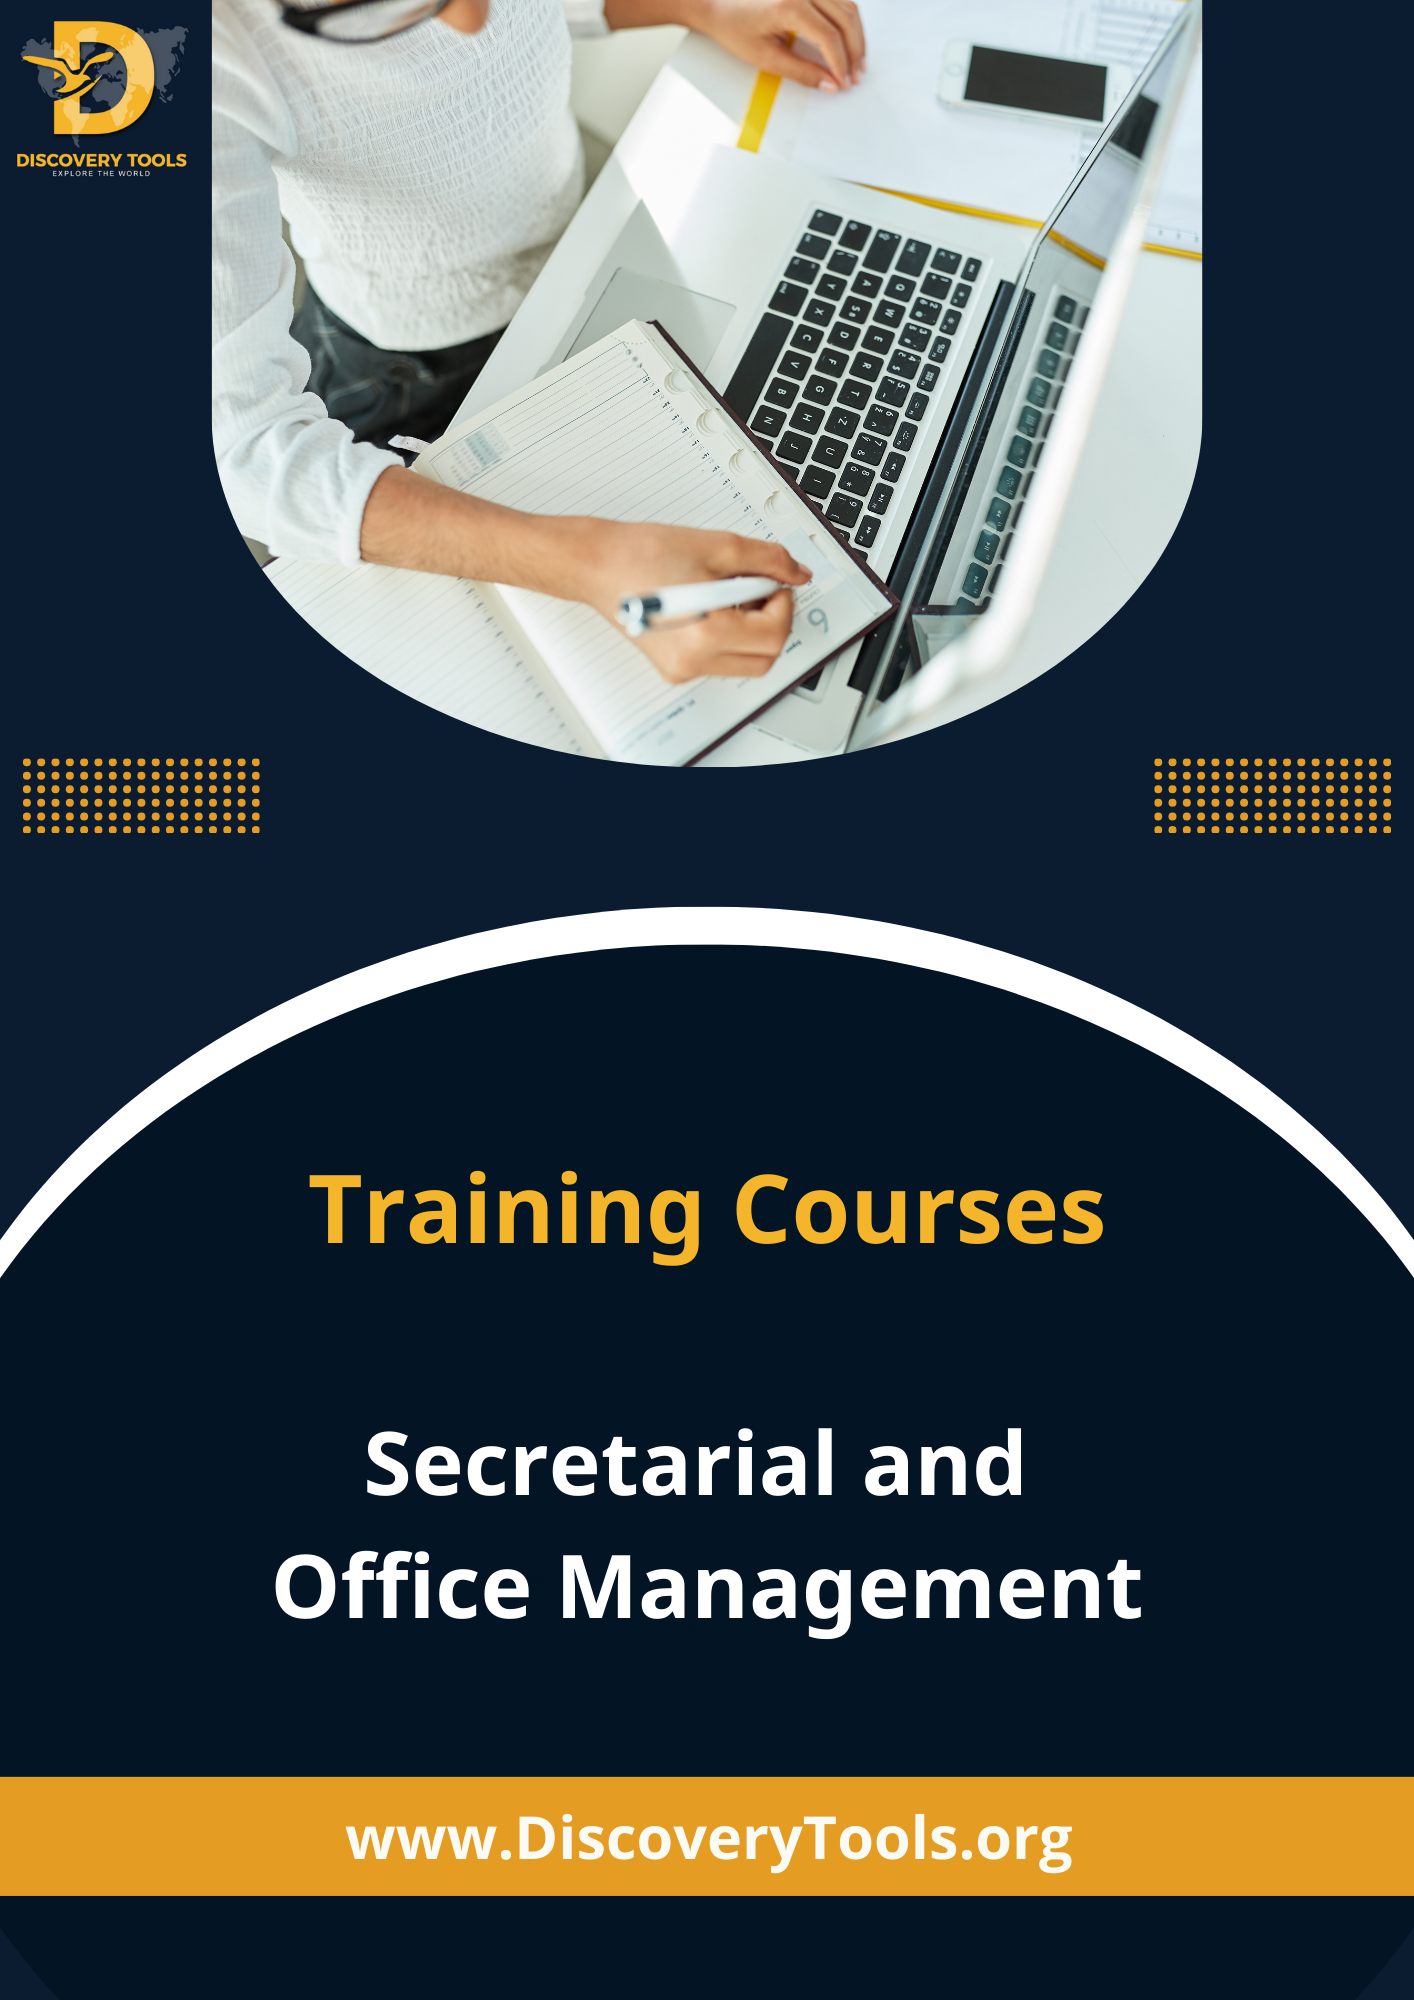 Secretarial and Office Management